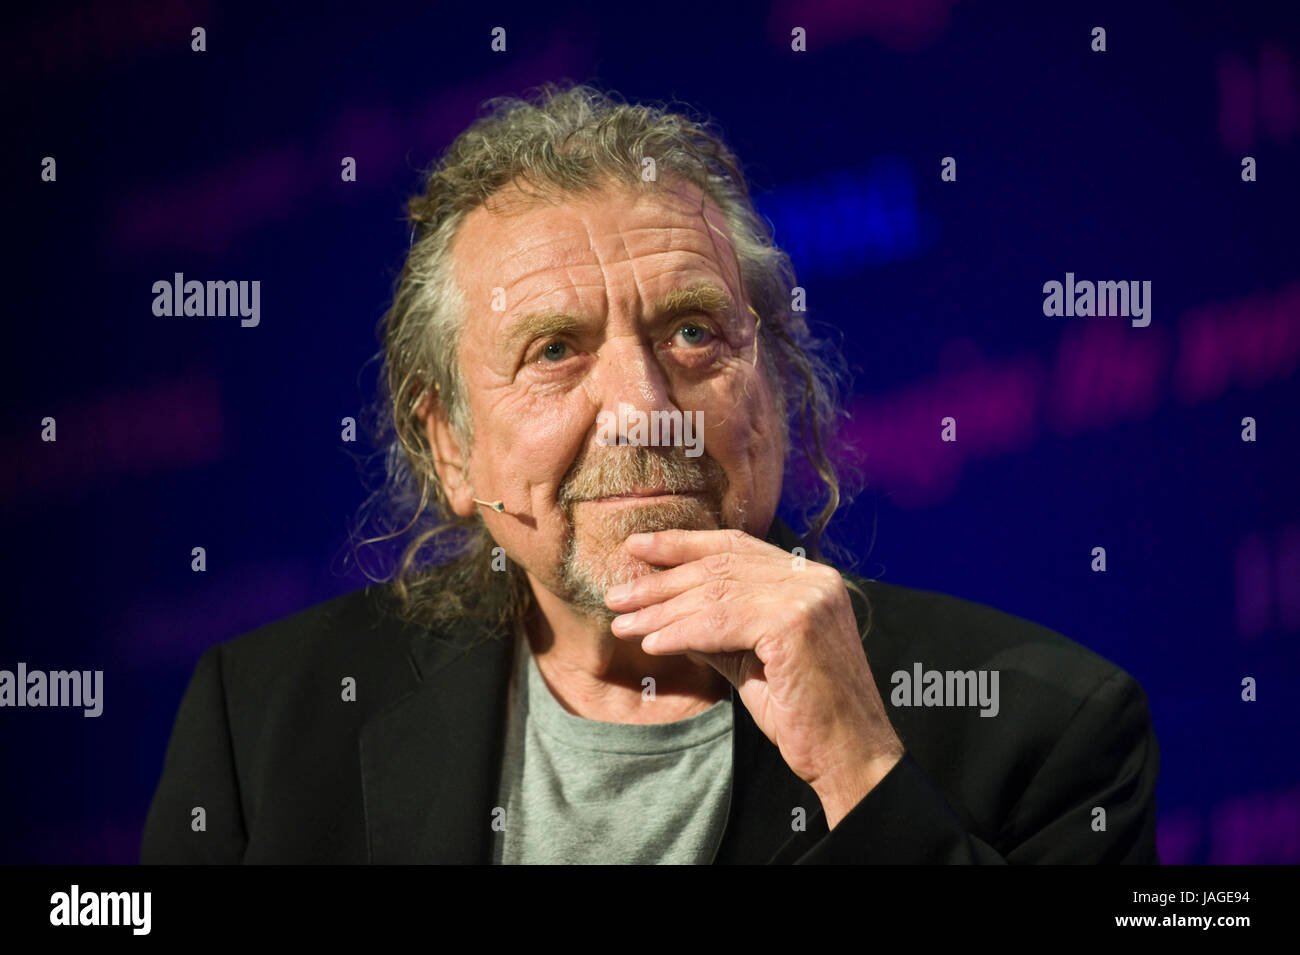 Robert Plant legendary singer songwriter & musician pictured on stage at Hay Festival of Literature and the Arts 2017 Hay on Wye Powys Wales UK Stock Photo